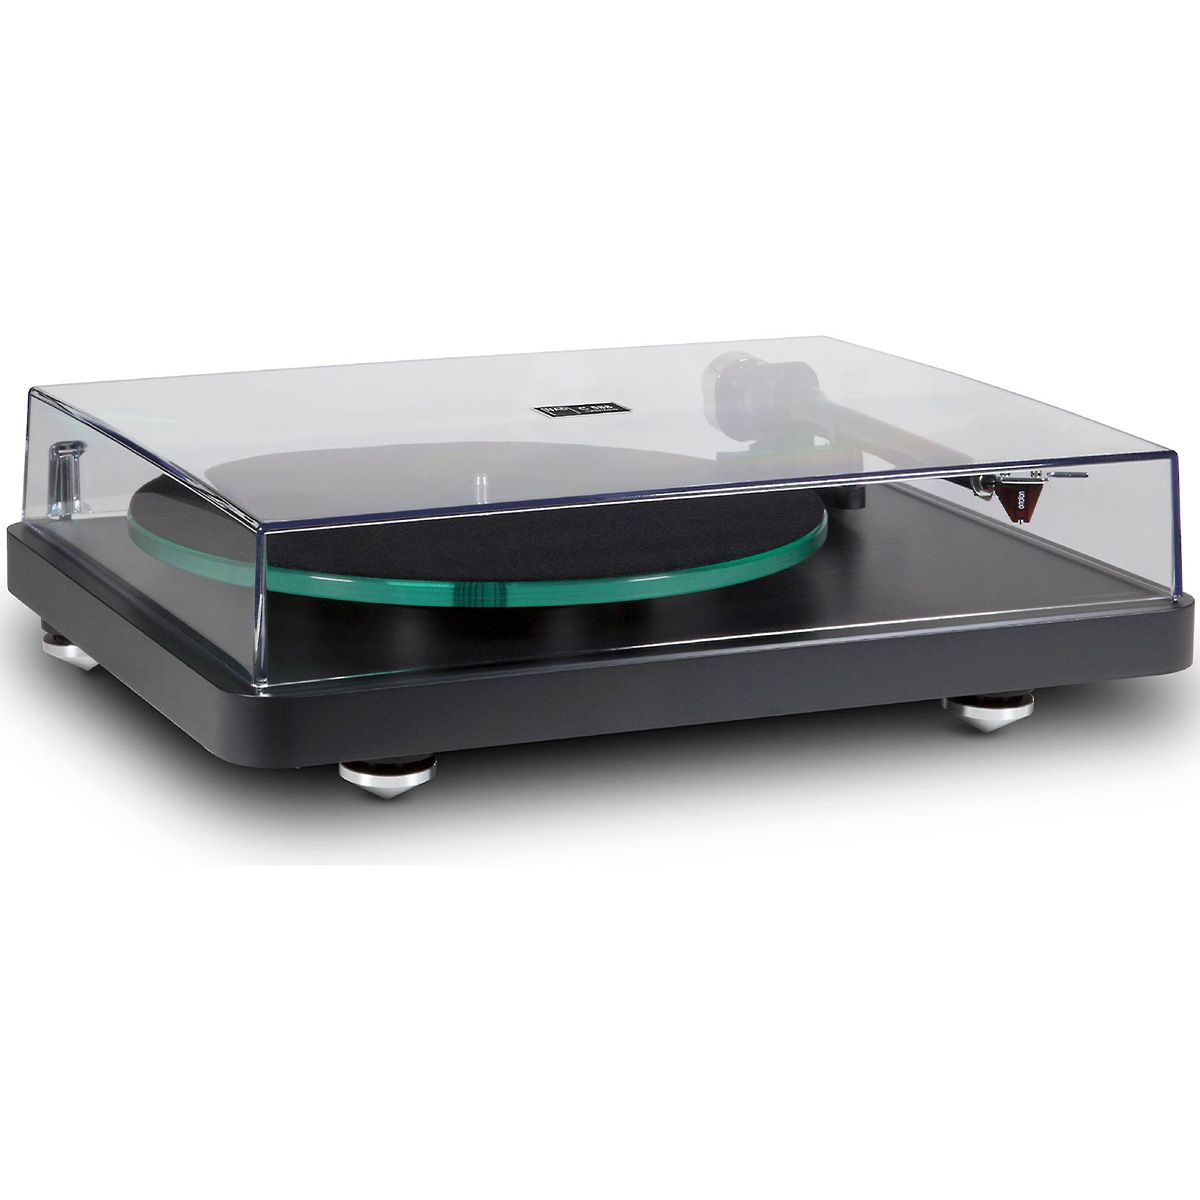 NAD C588 Manual Belt-Drive Turntable - Front View with Dustcover Closed